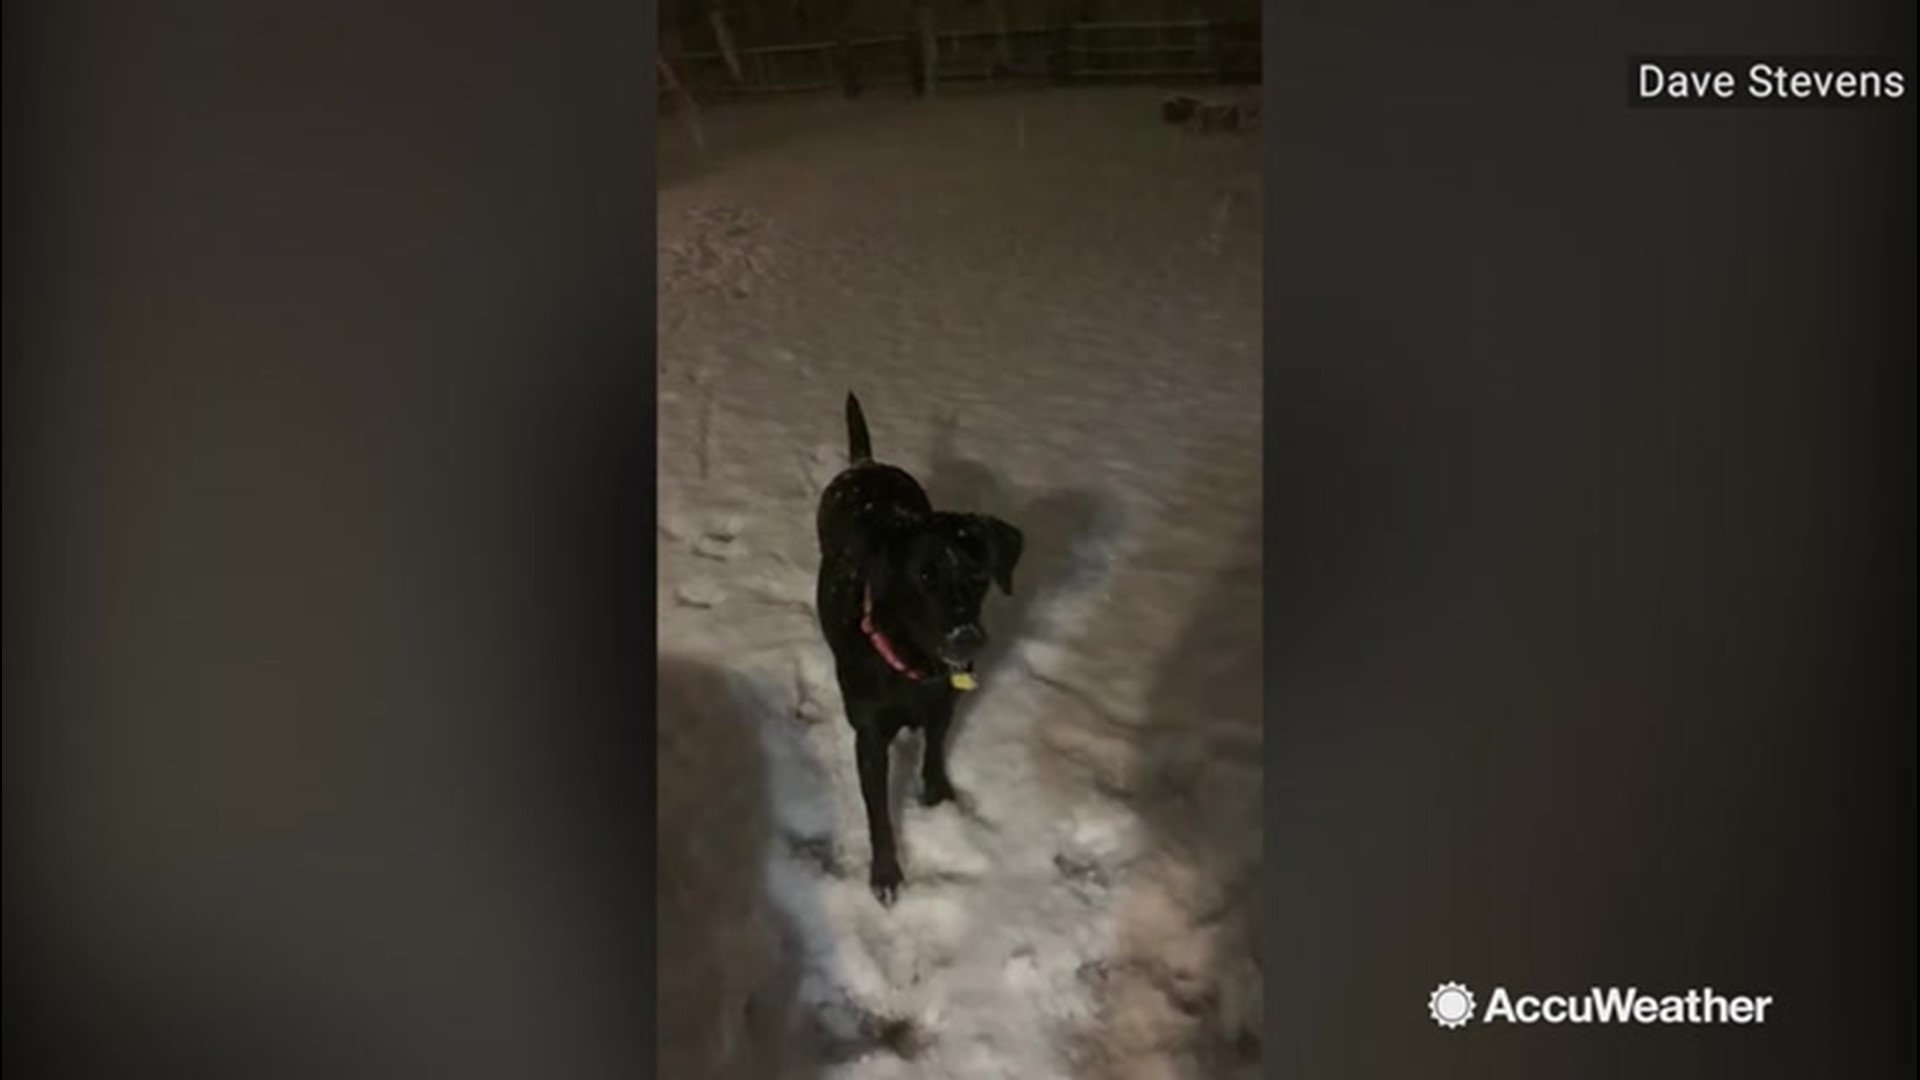 Dave Stevens and his dog Minnie had some fun with snowball fetch in the fresh snow on Dec. 15 in Indianapolis, Indiana.